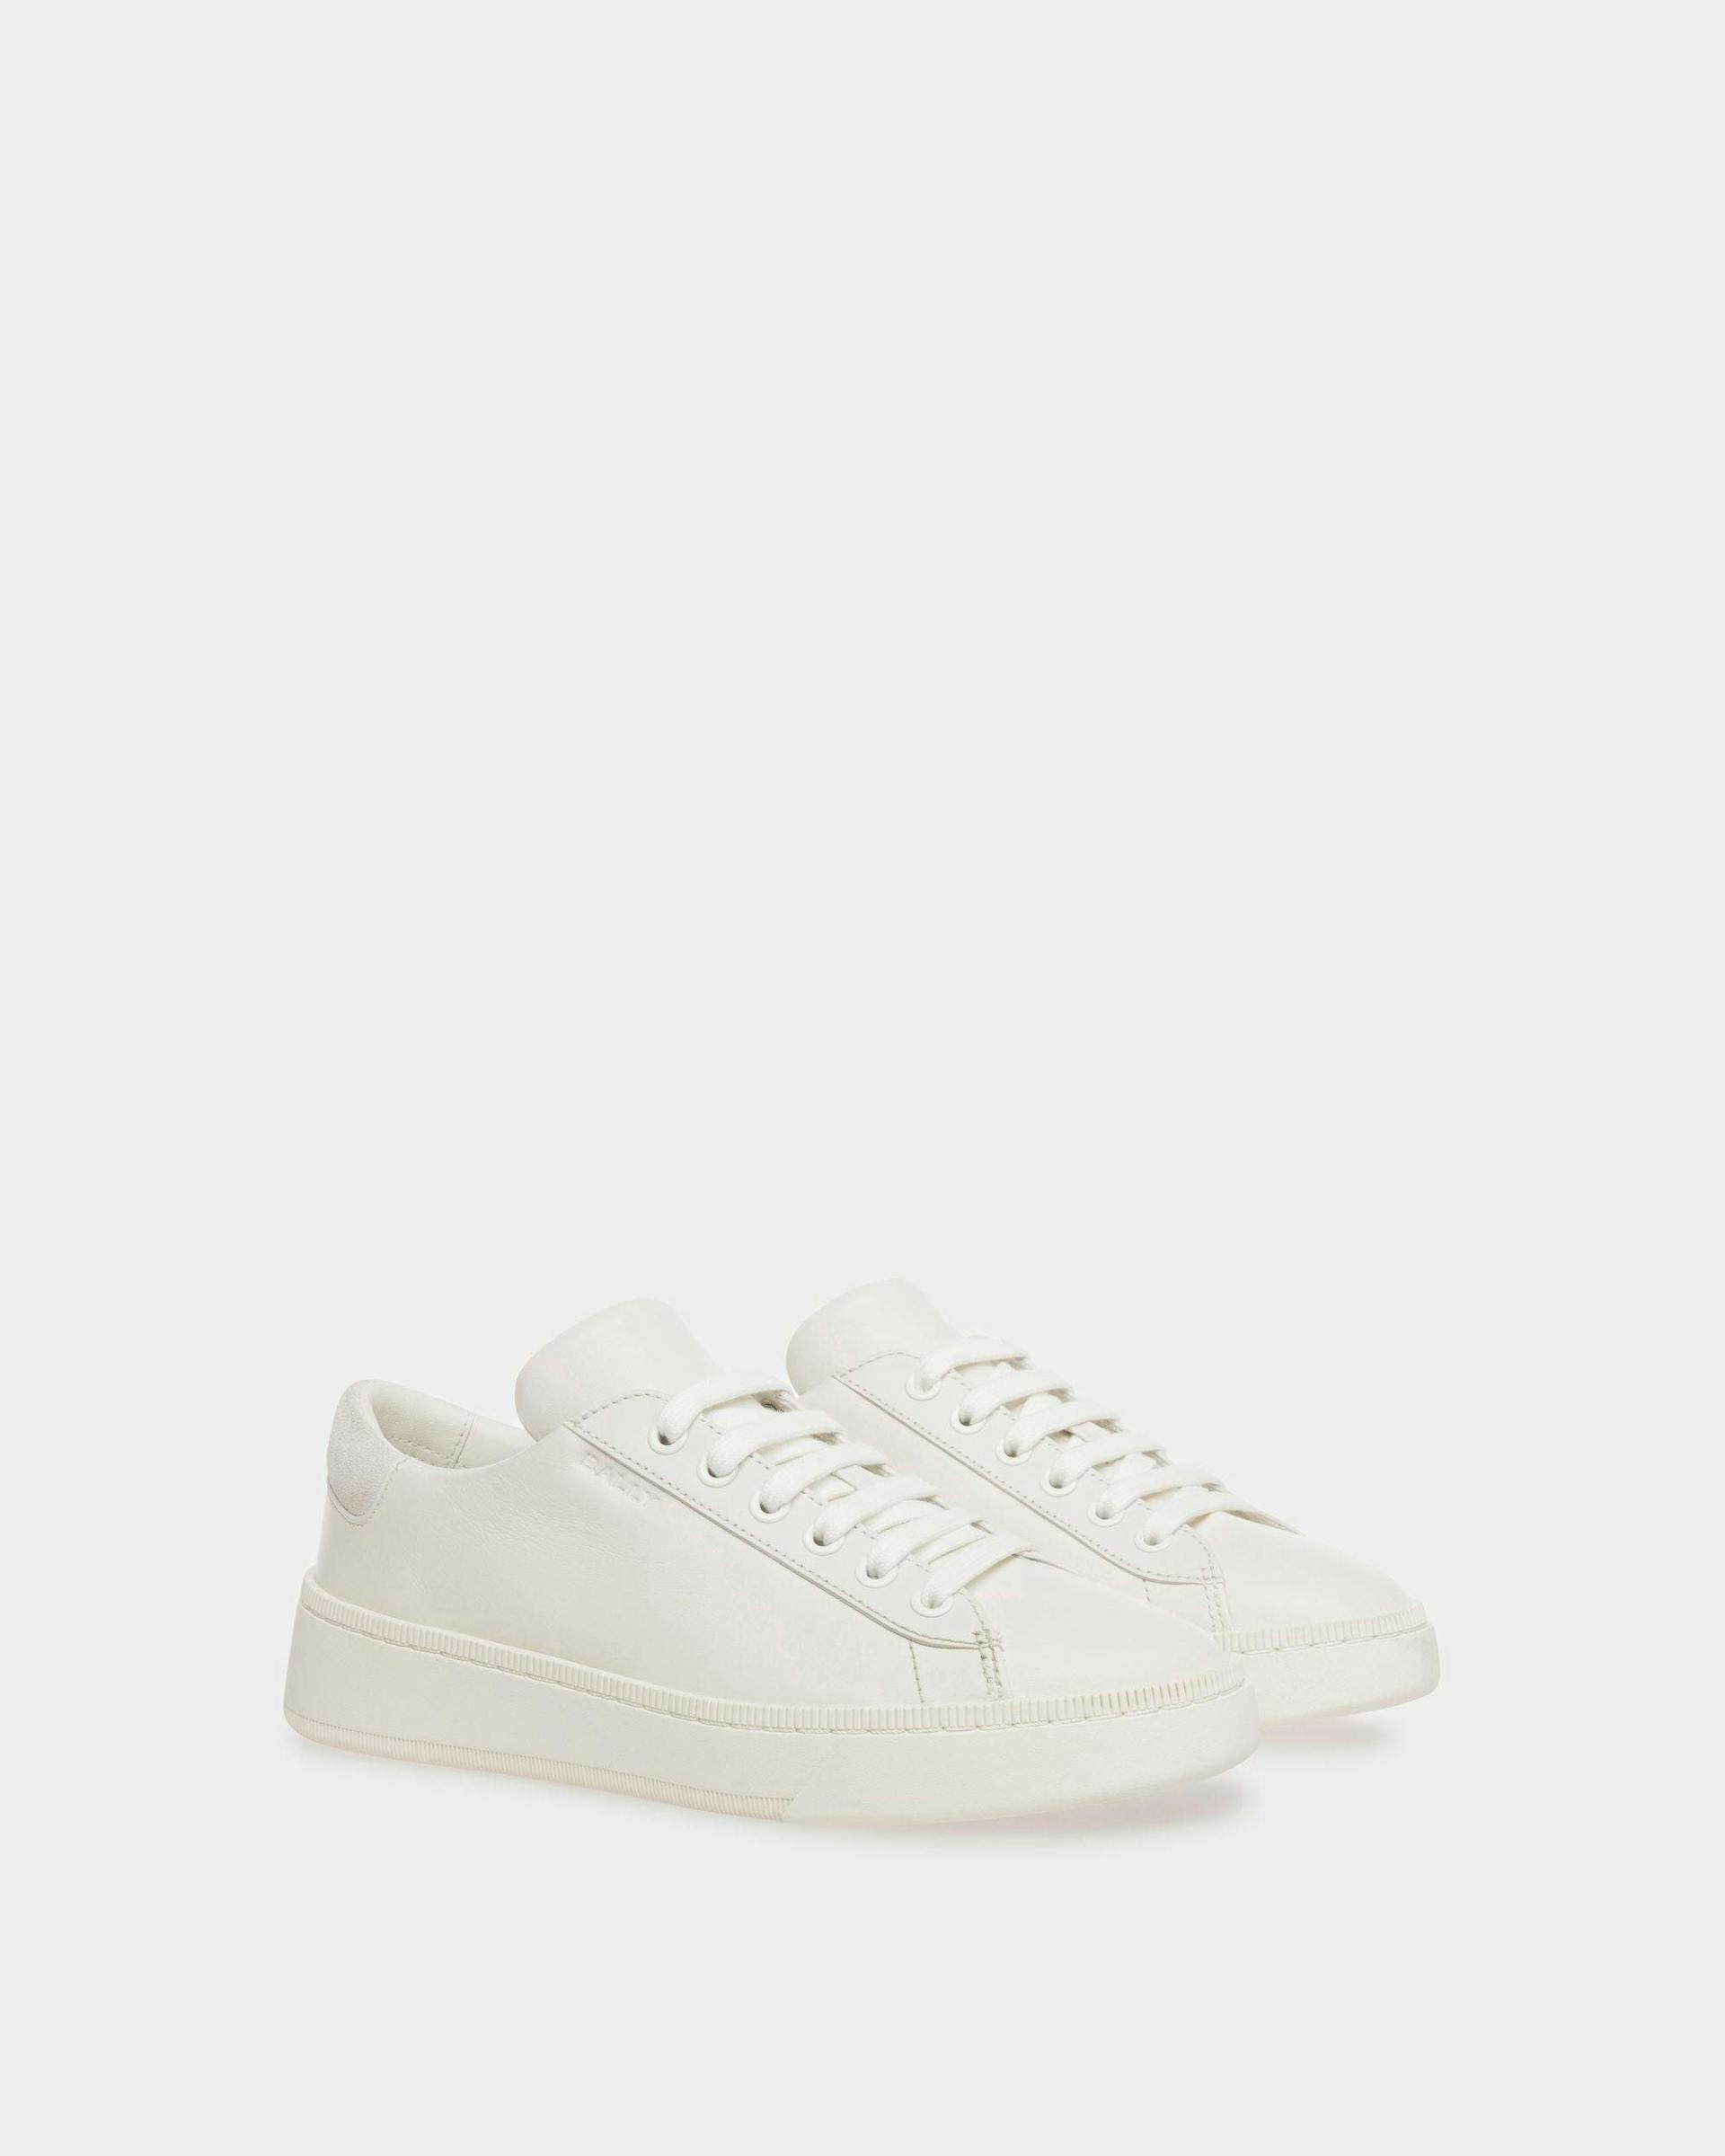 Raise Sneakers In White Leather - Women's - Bally - 04